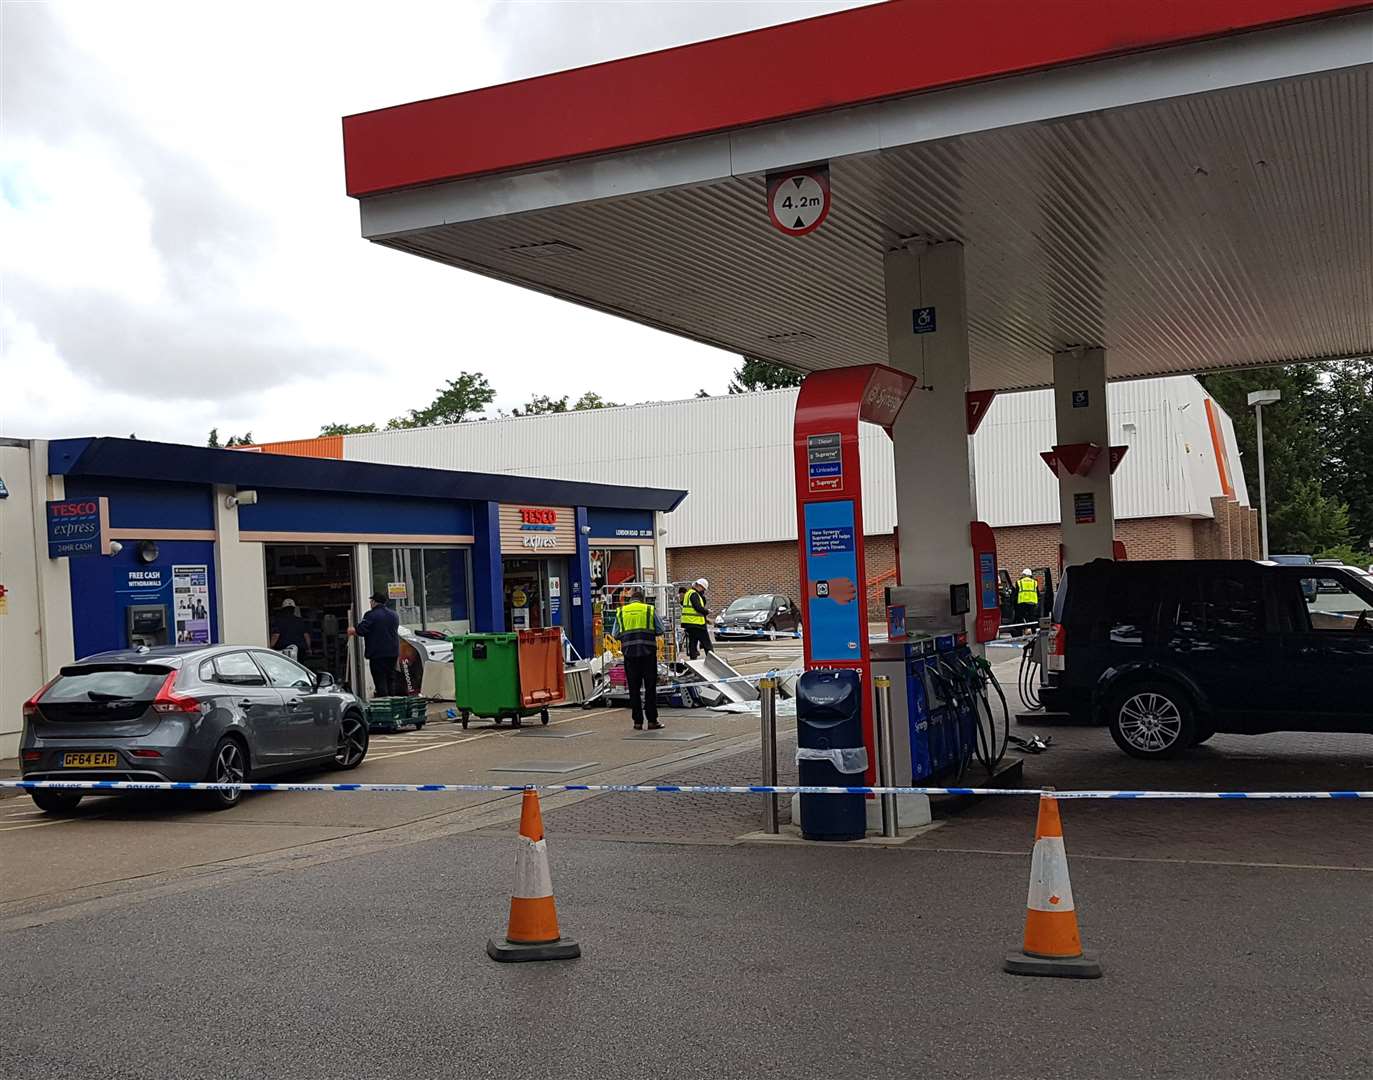 The Tesco Express petrol station in London Road, Larkfield, has been hit by ram-raiders